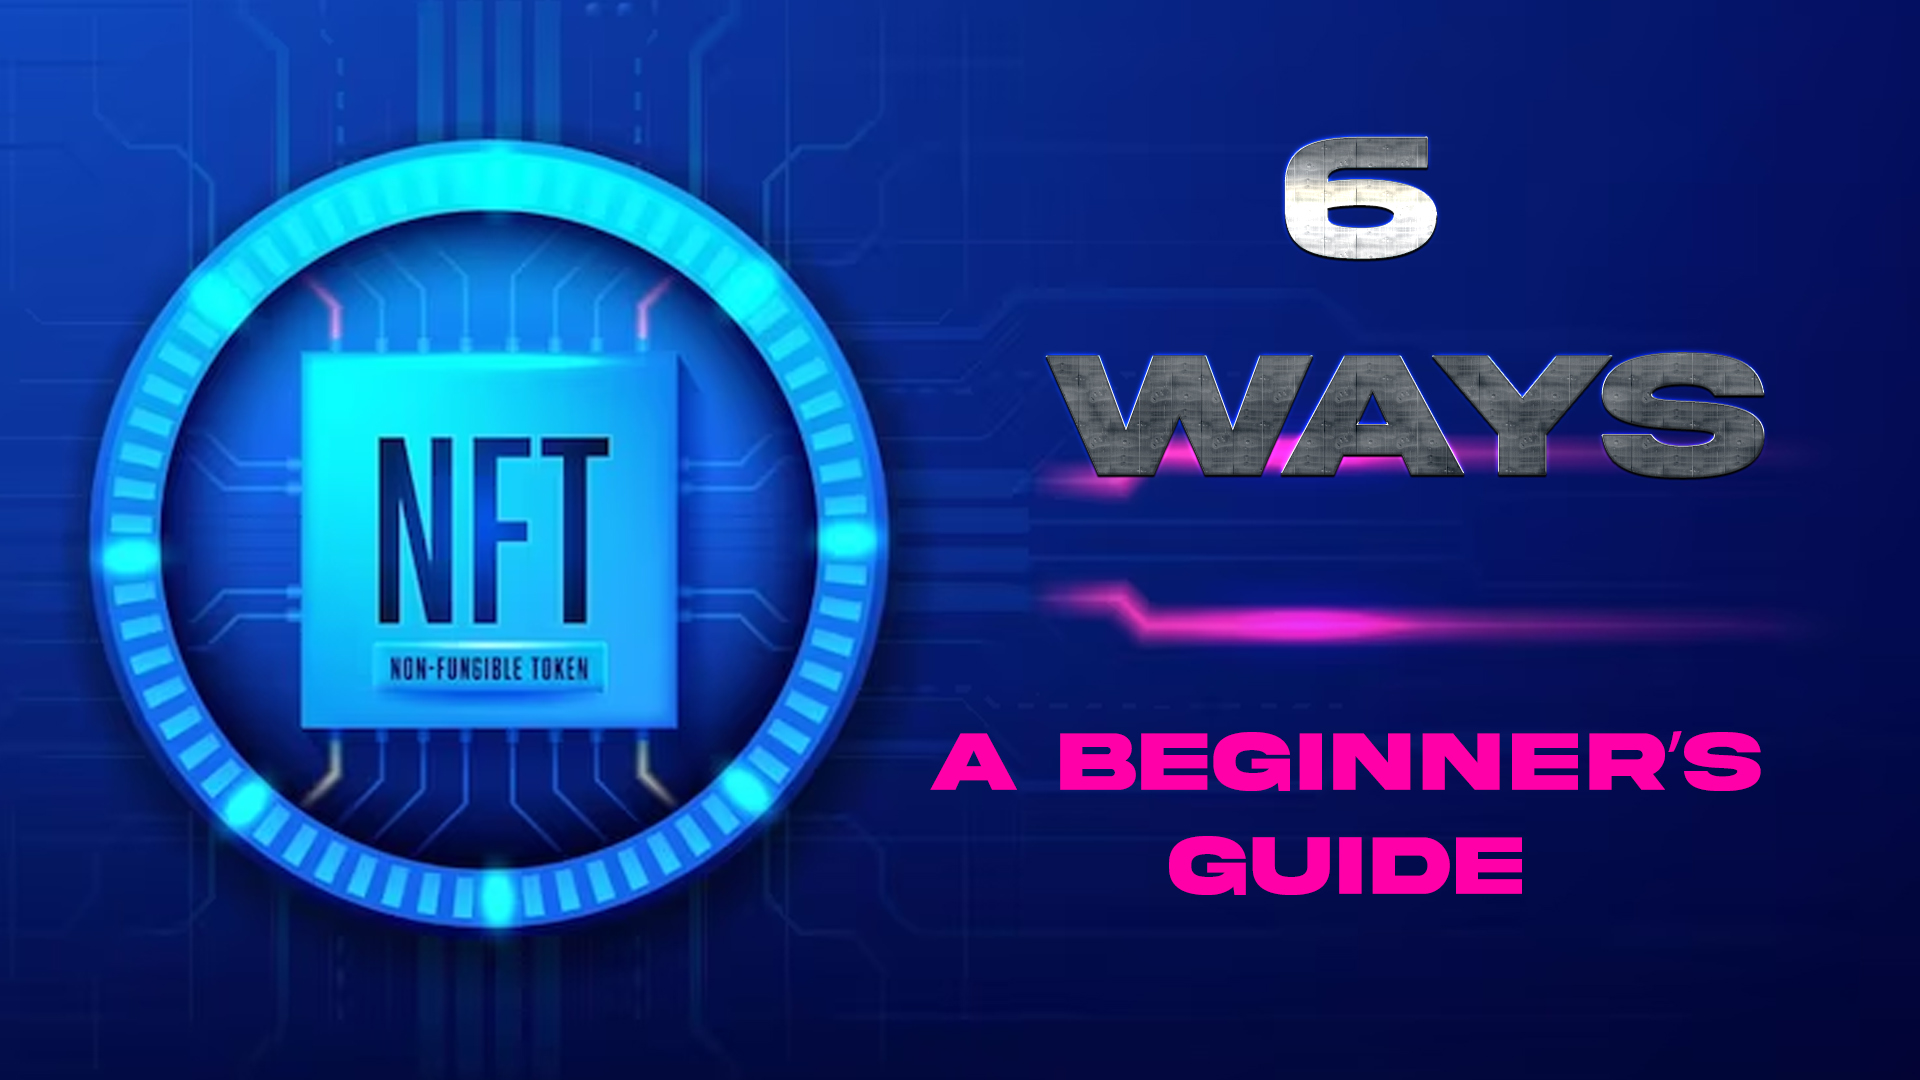 Build Your Riches Through Nfts In 6 Ways: A Beginner’s Guide